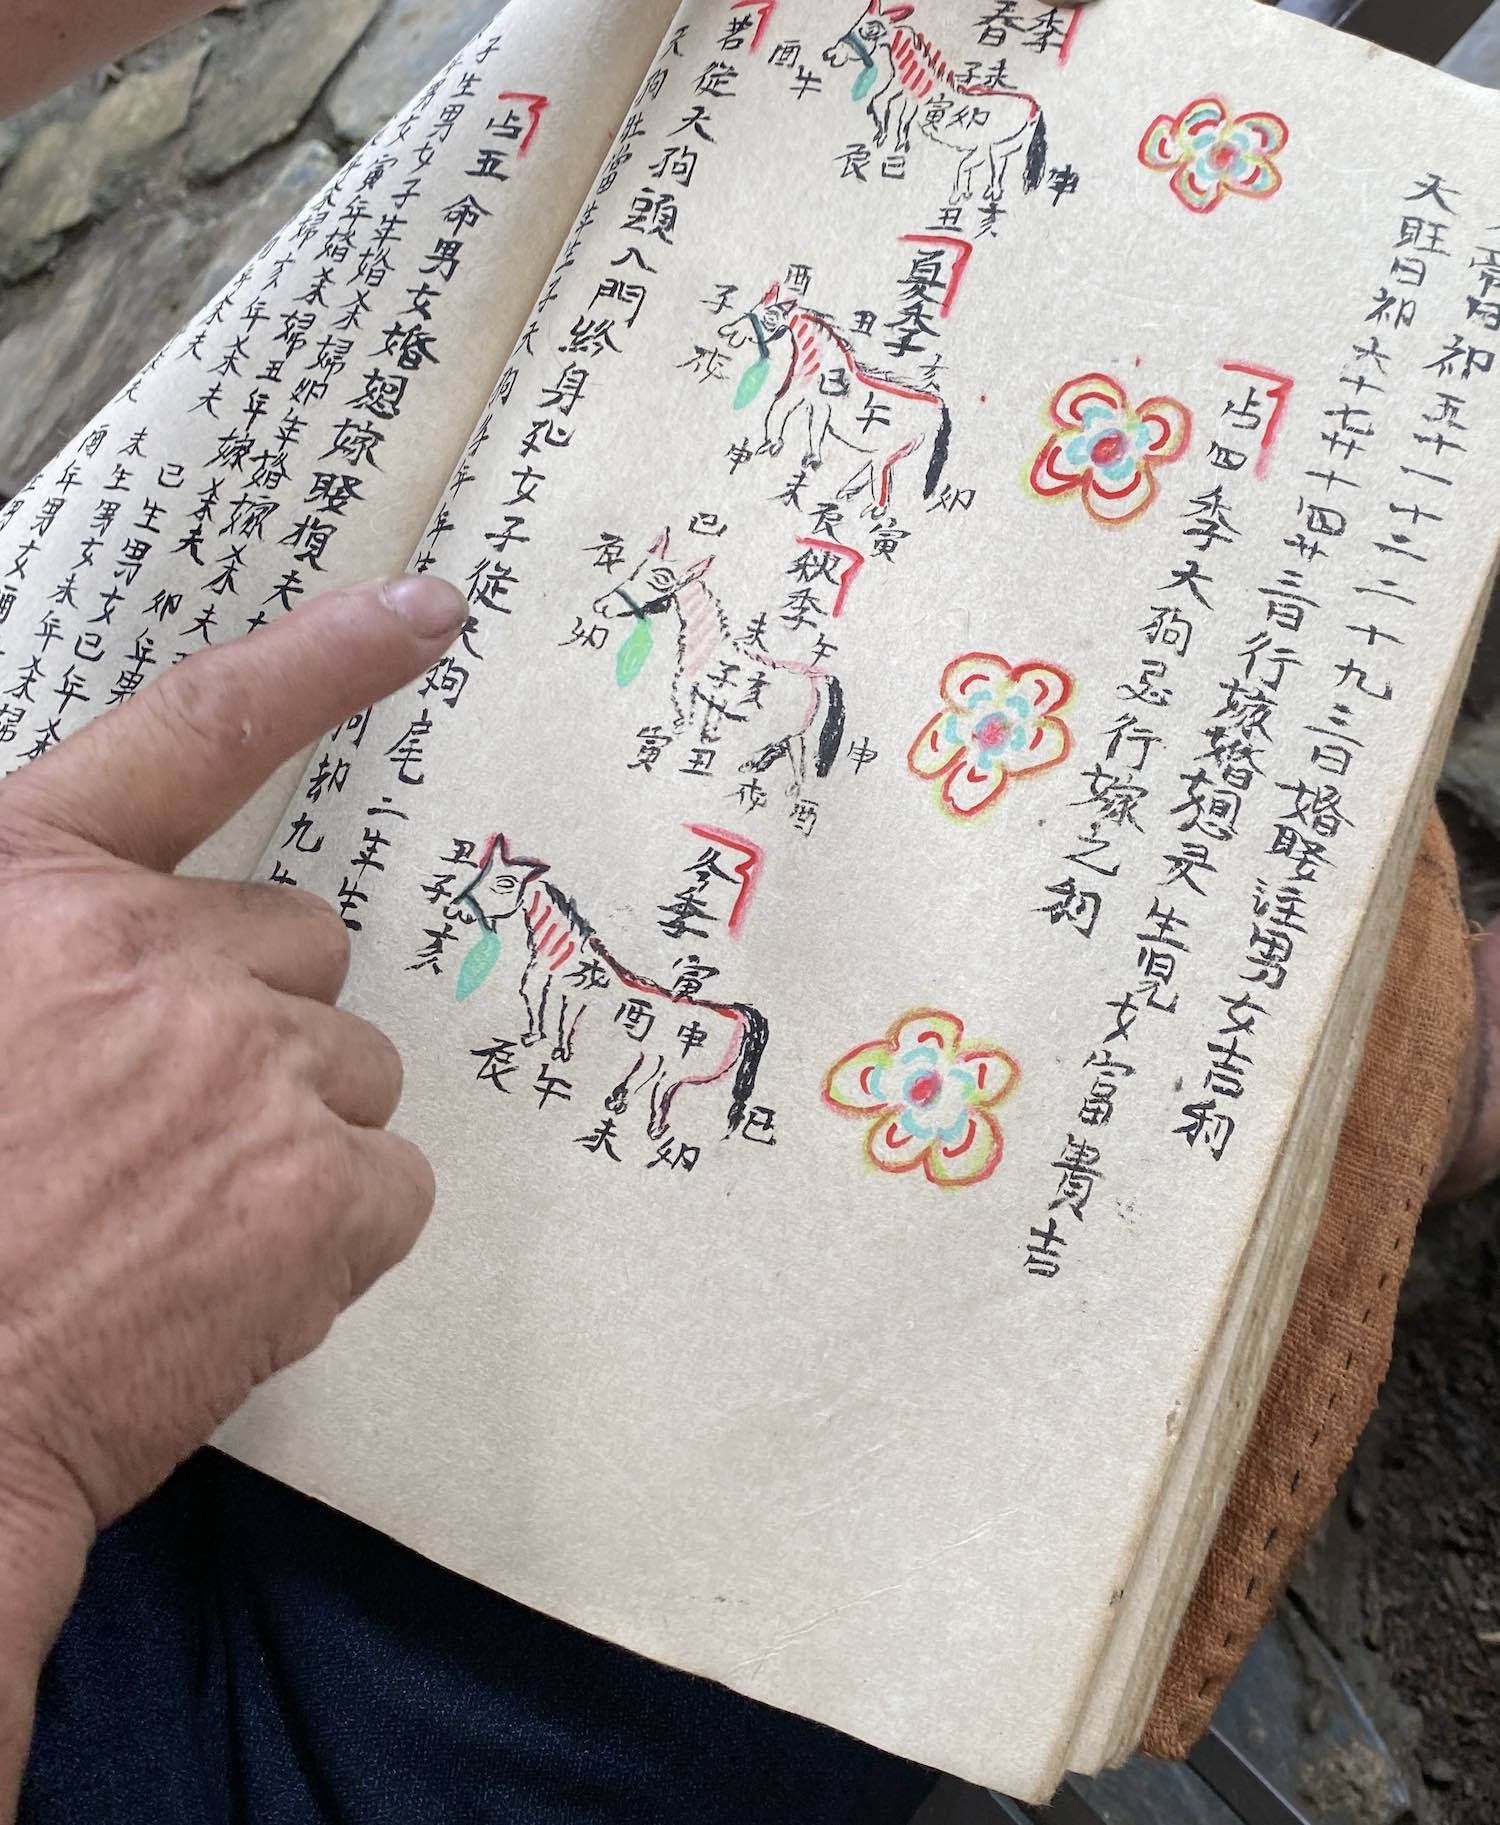 Dao Tien’ language connects immensely with their cultural practices such as rituals, ceremonies, and more. This is an example of a type of books that shamen or wise elders read to analyze people’s fates based on their birthdays (in Lunar calendar) © SUSDEV